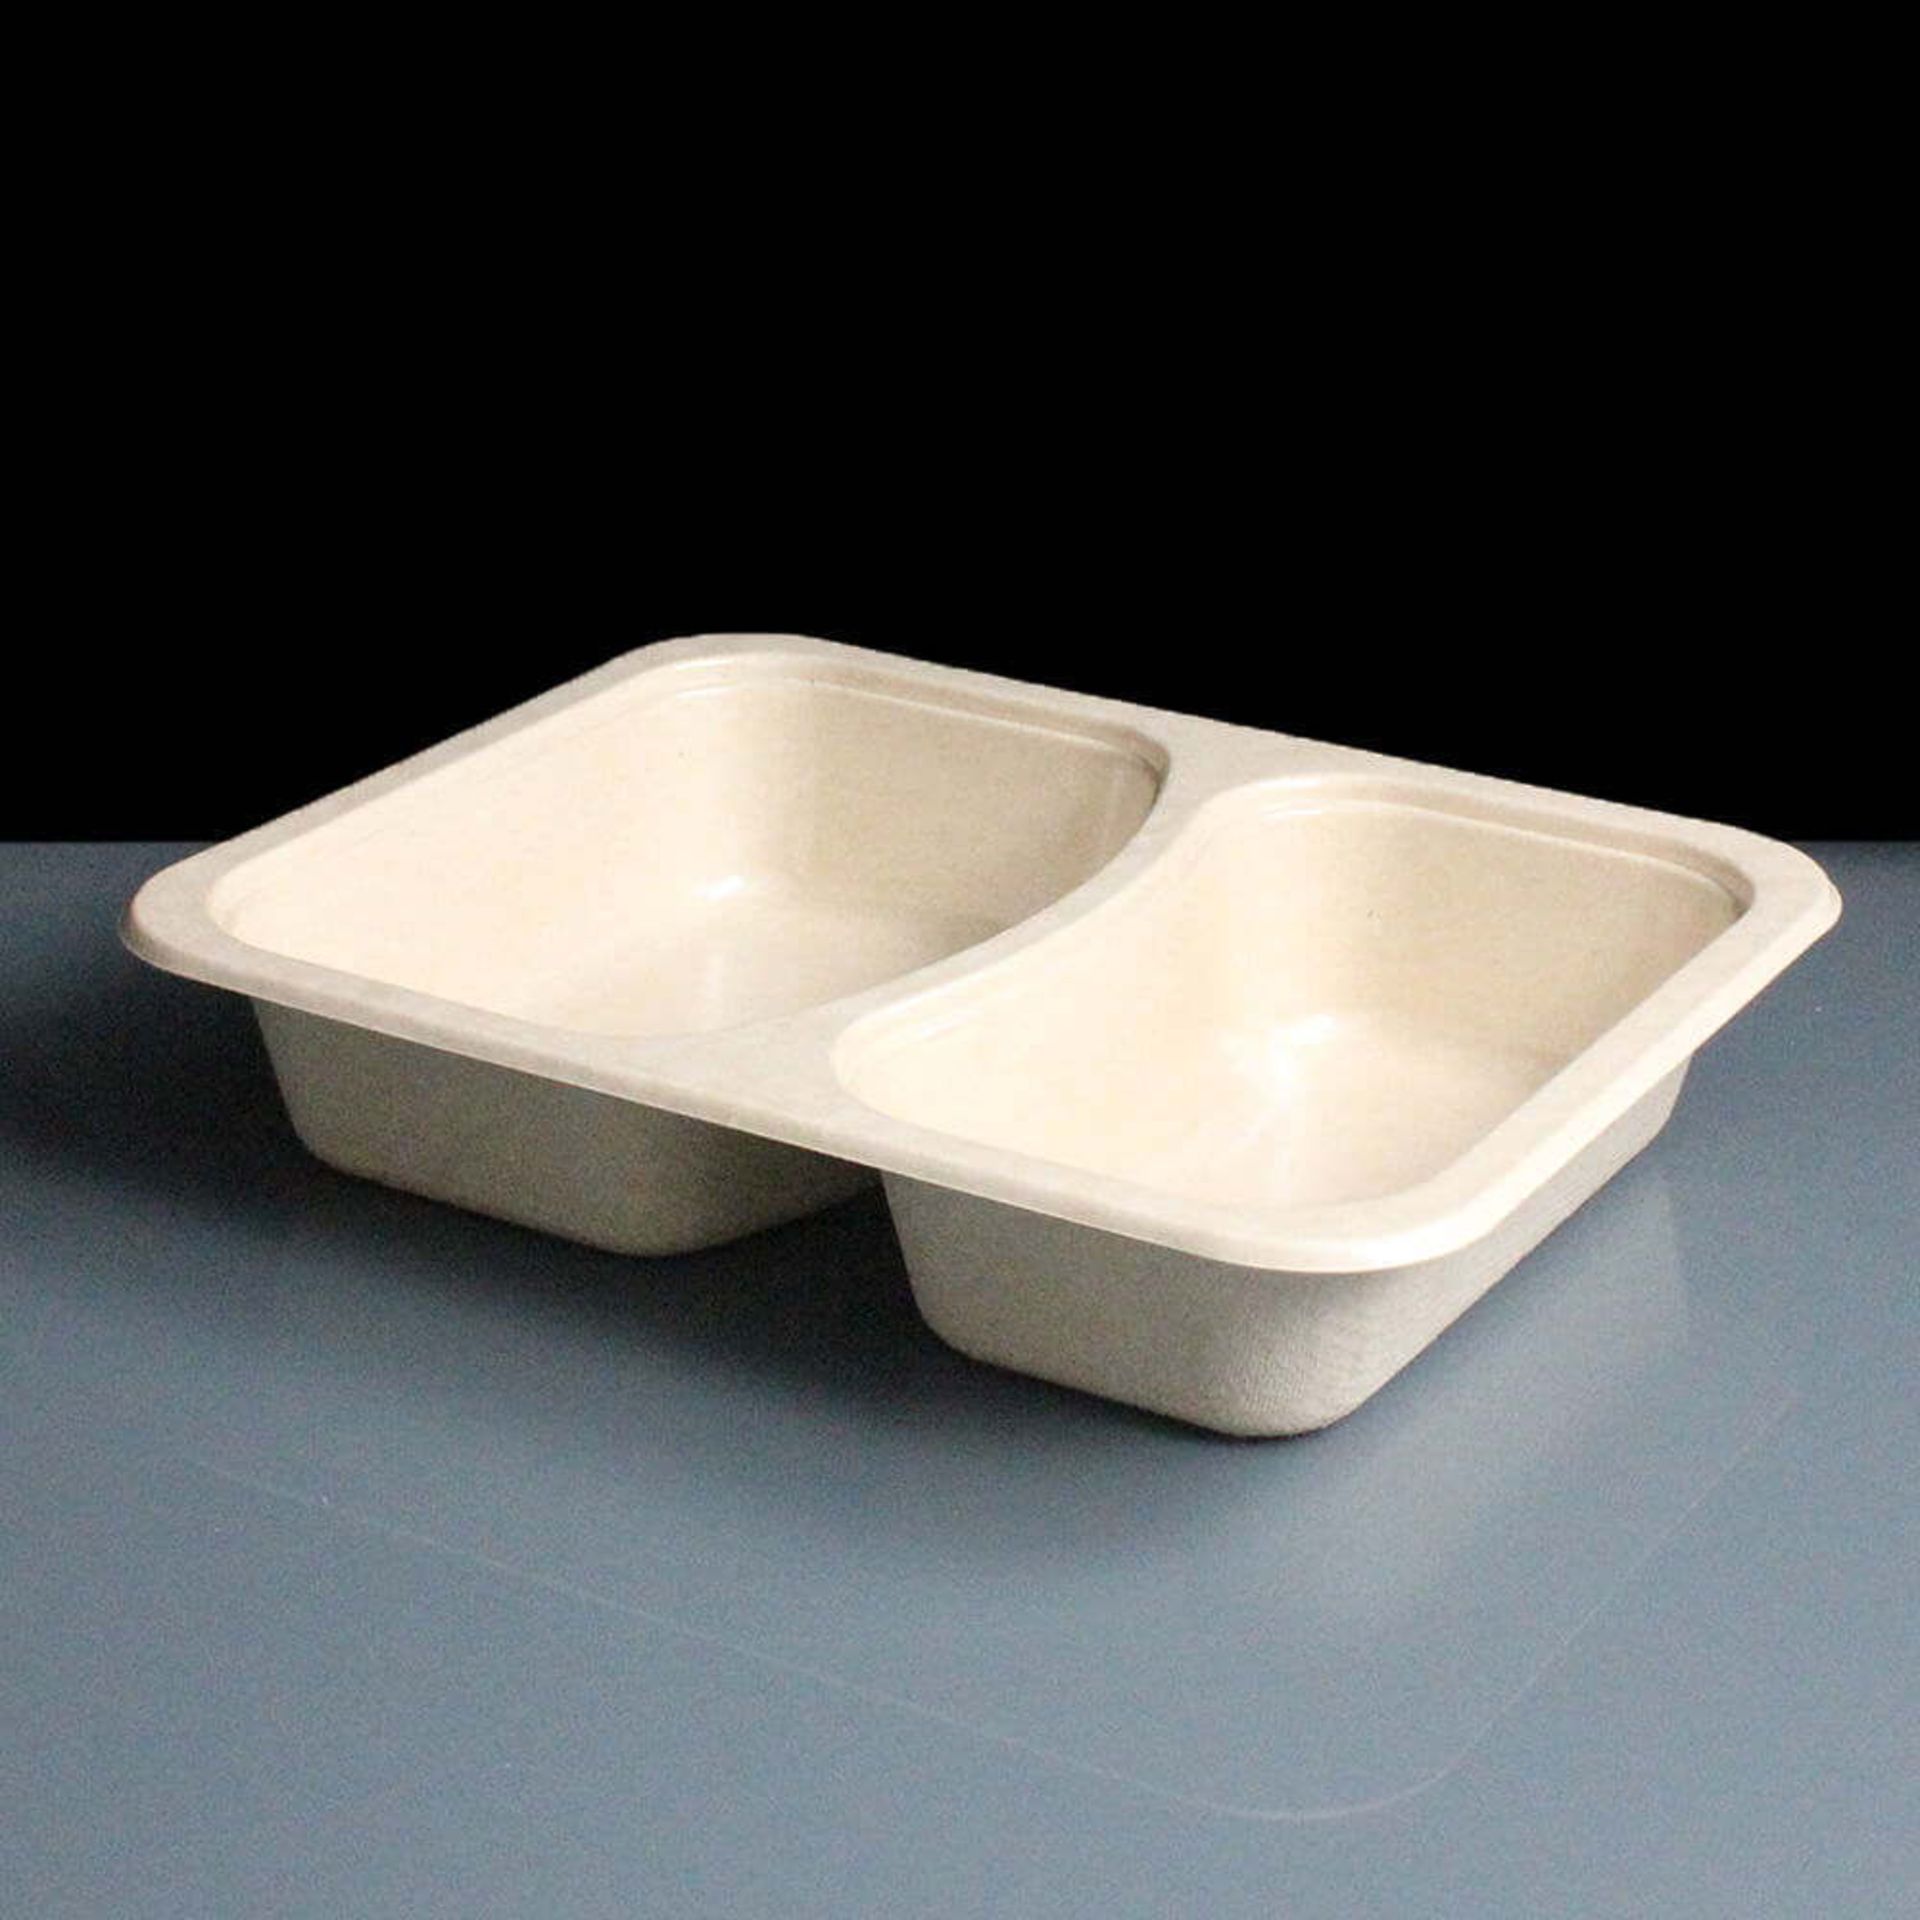 320 x Two Compartment Food Trays - Paper Based With 95% Less Plastic - Can Be Used in Freezers and